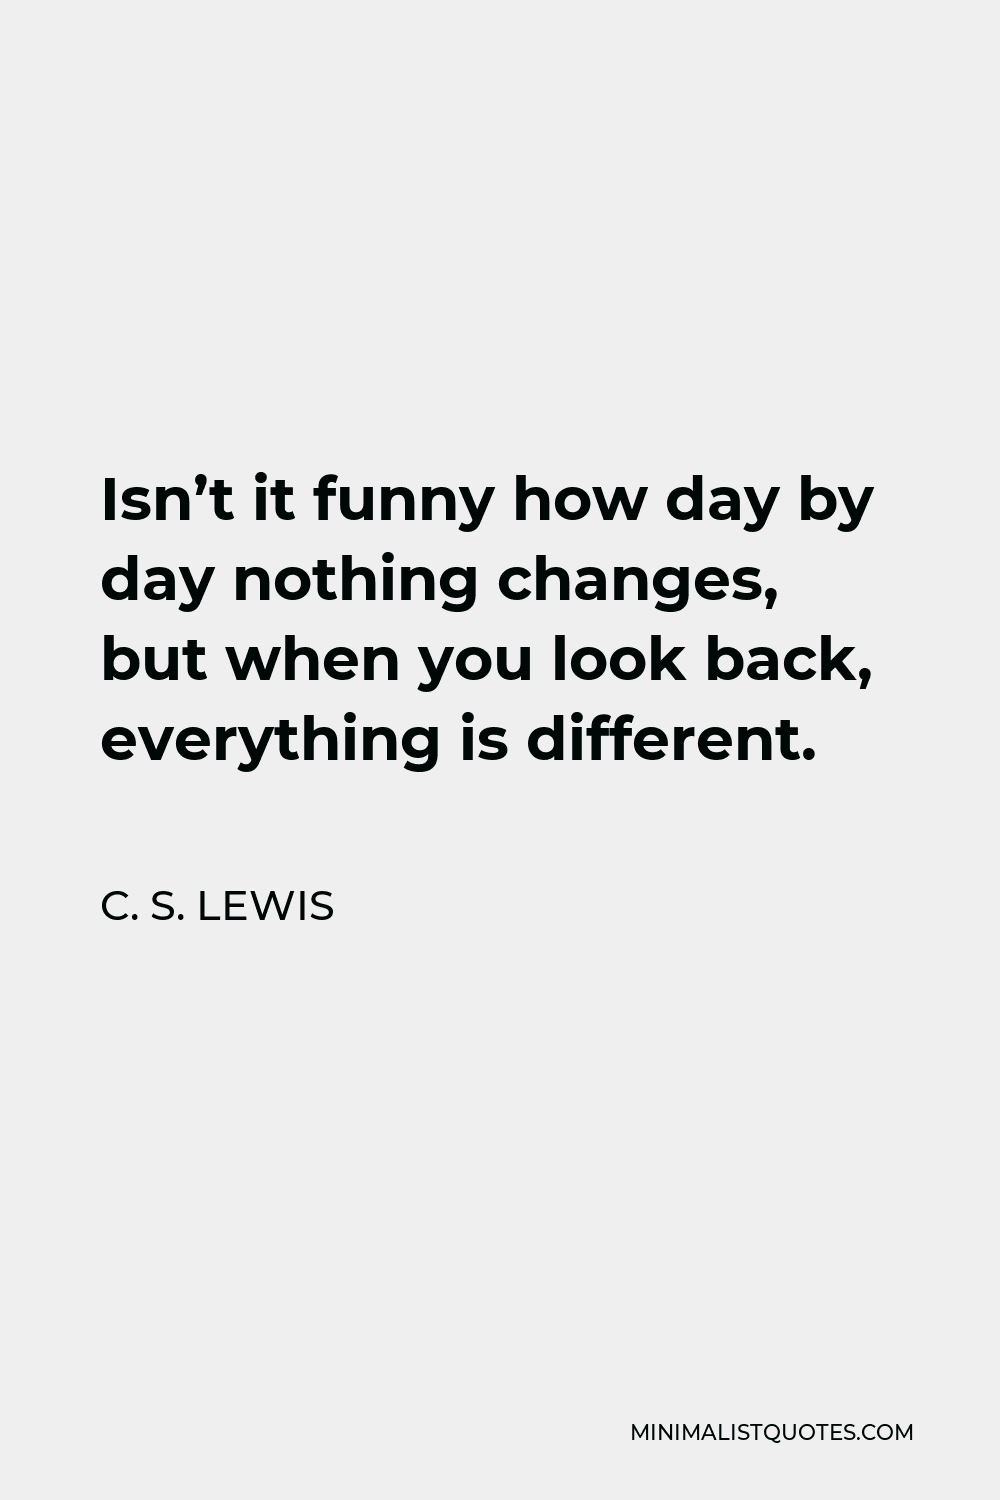 C. S. Lewis Quote - Isn’t it funny how day by day nothing changes, but when you look back, everything is different.